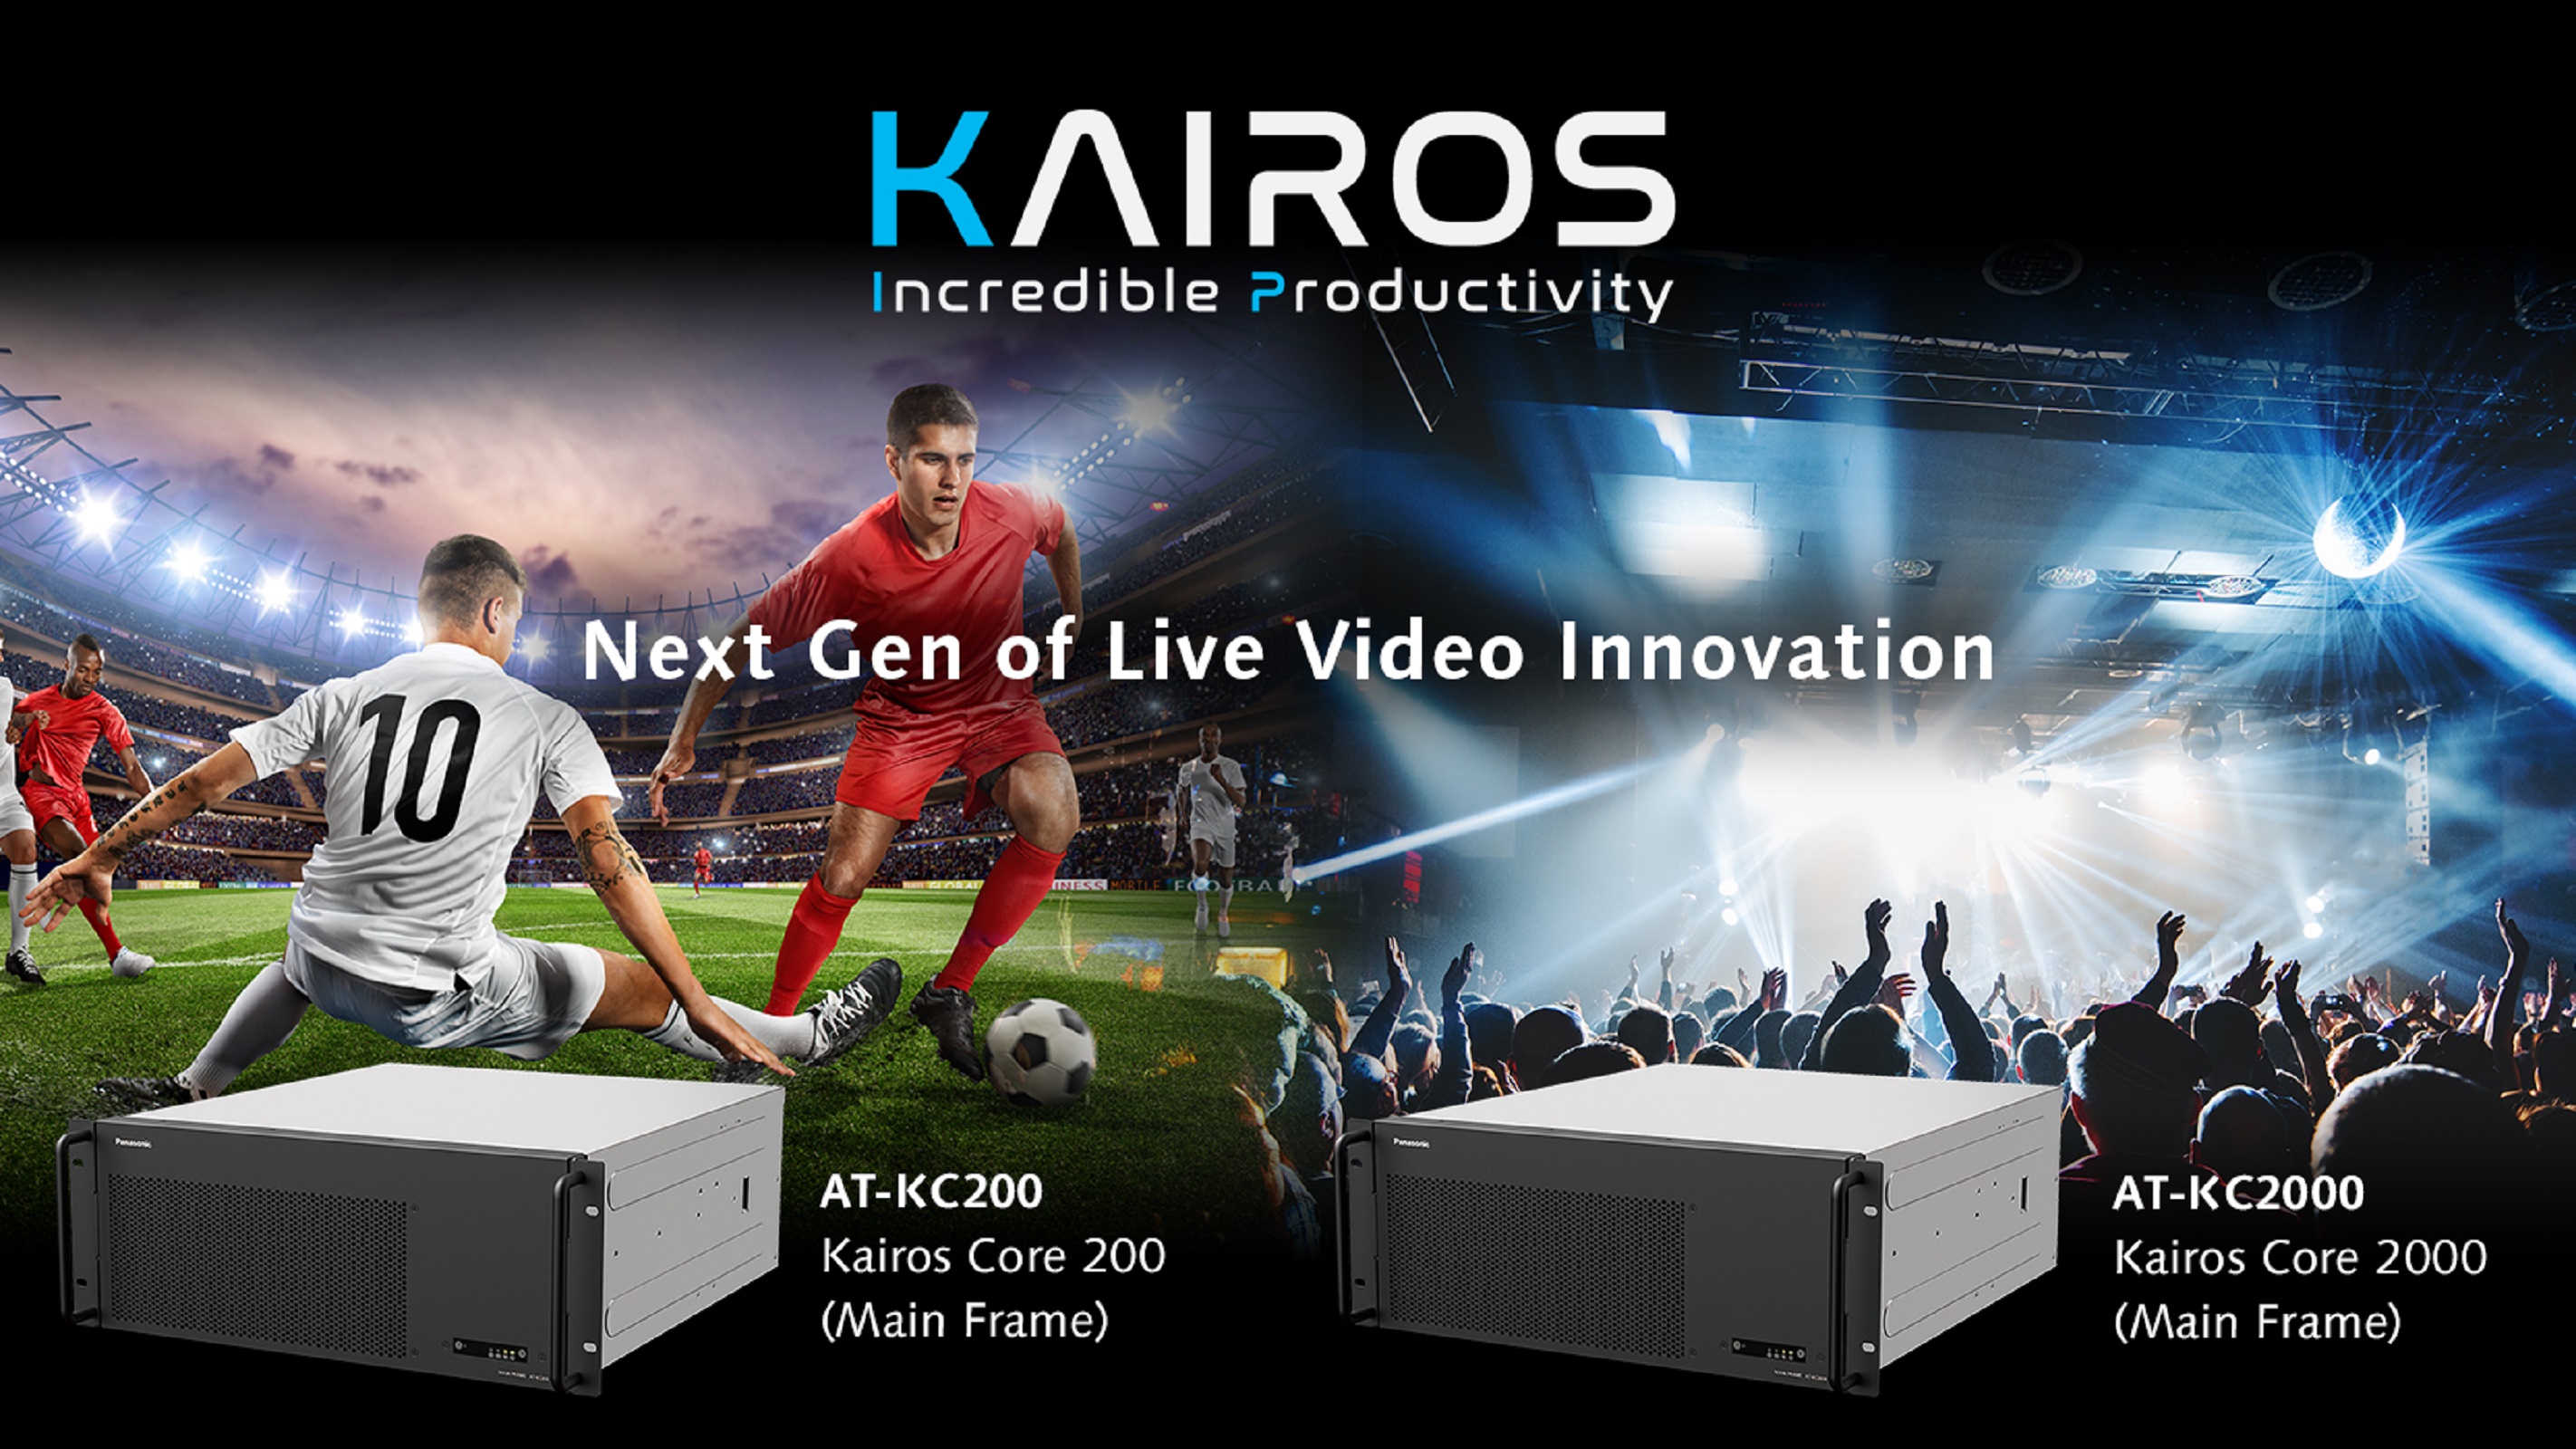 Panasonic Join Broadcasts Subsequent Technology of KAIROS Dwell Manufacturing Platform | Panasonic North America